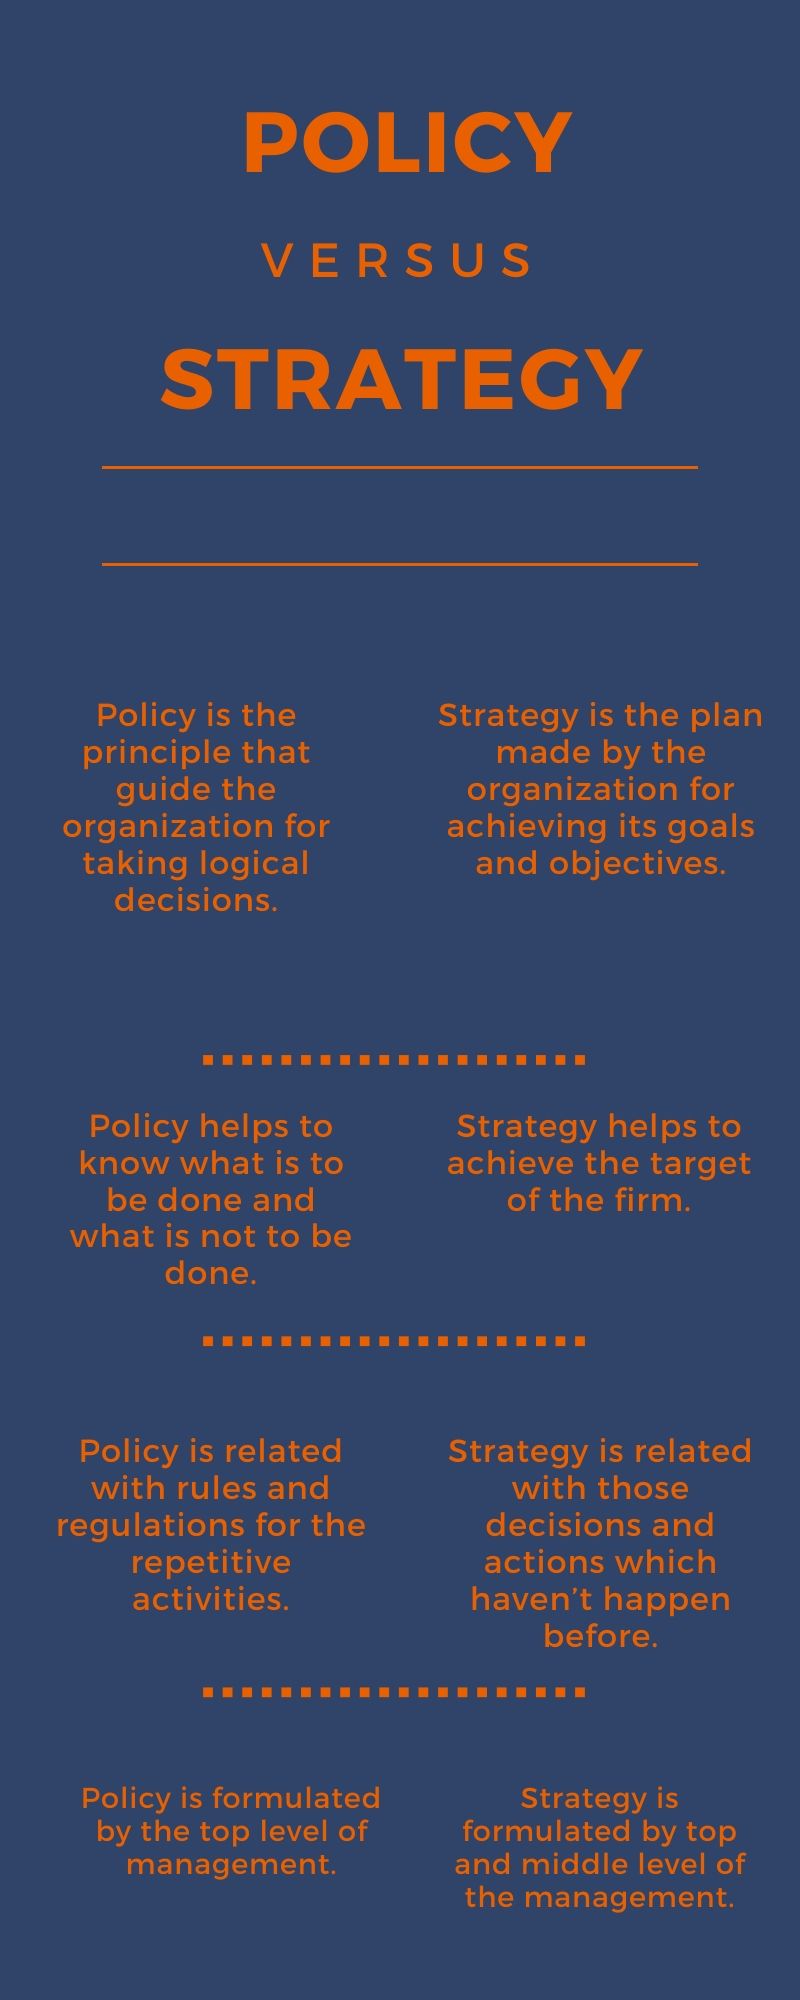 policy vs strategy